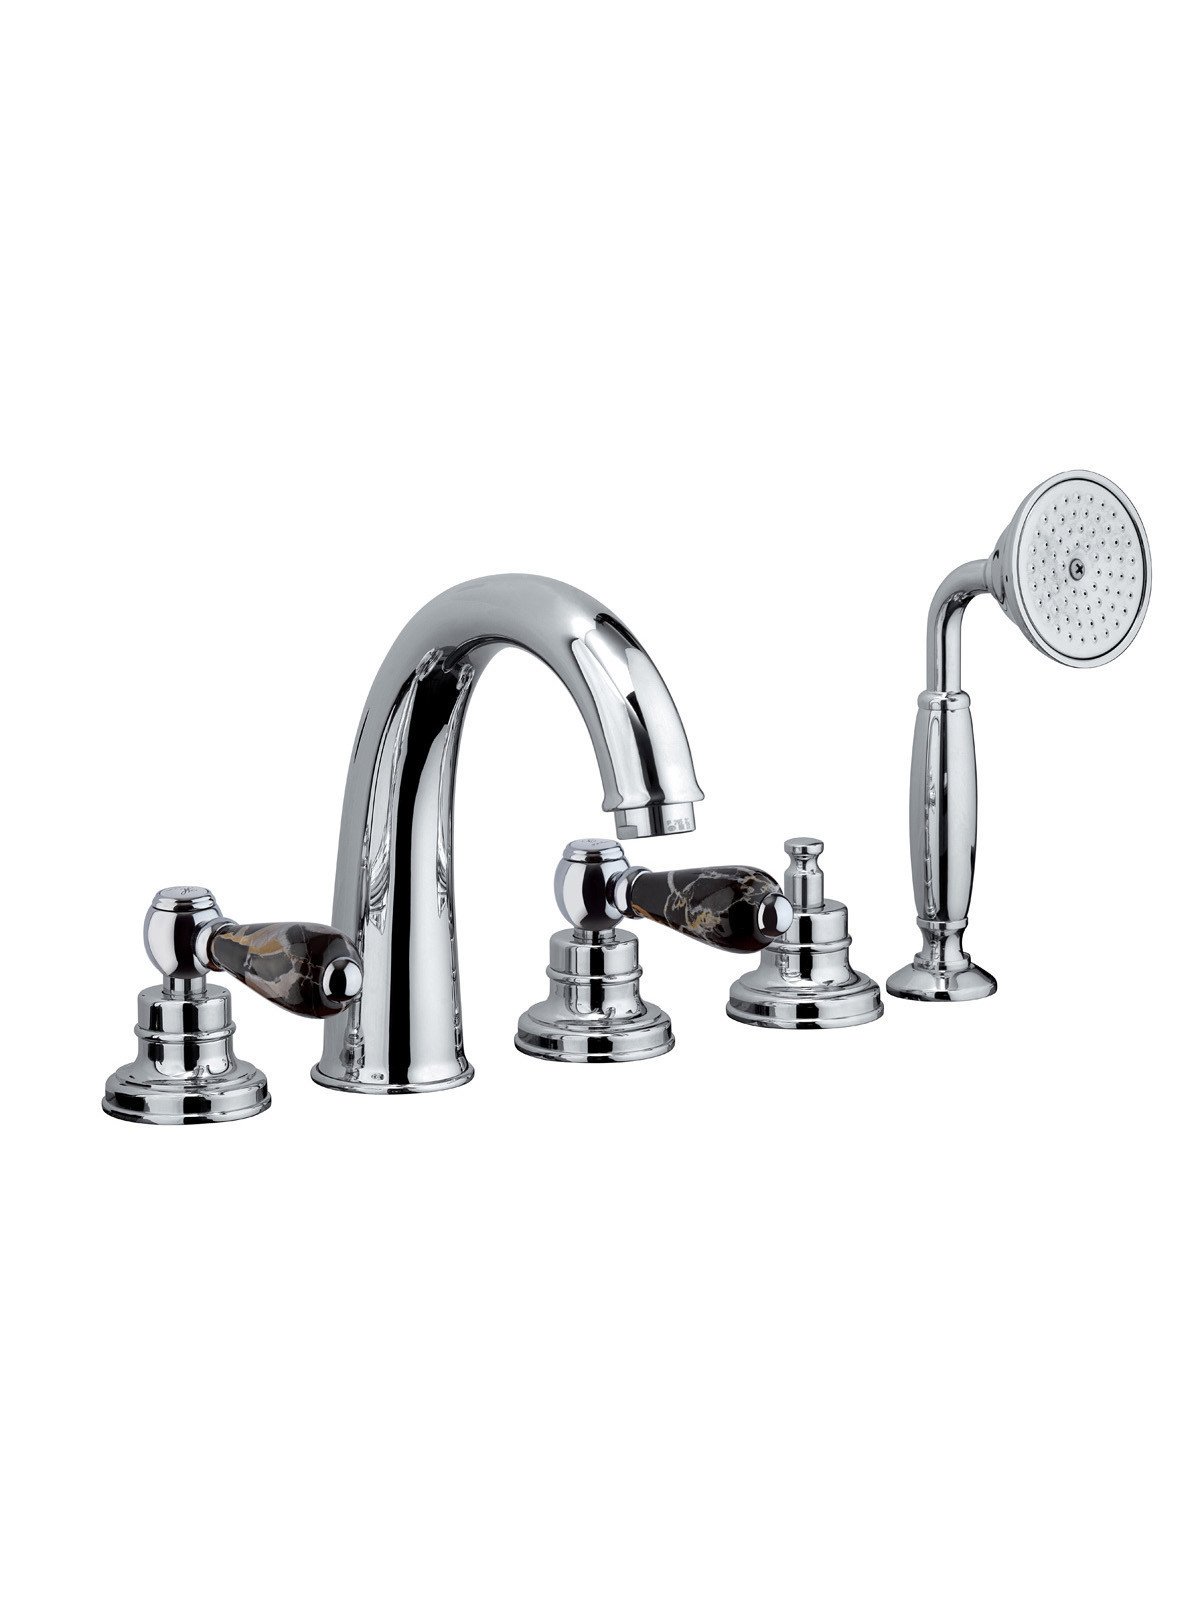 Deck mounted bath mixer with diverter, pull-out shower and spout